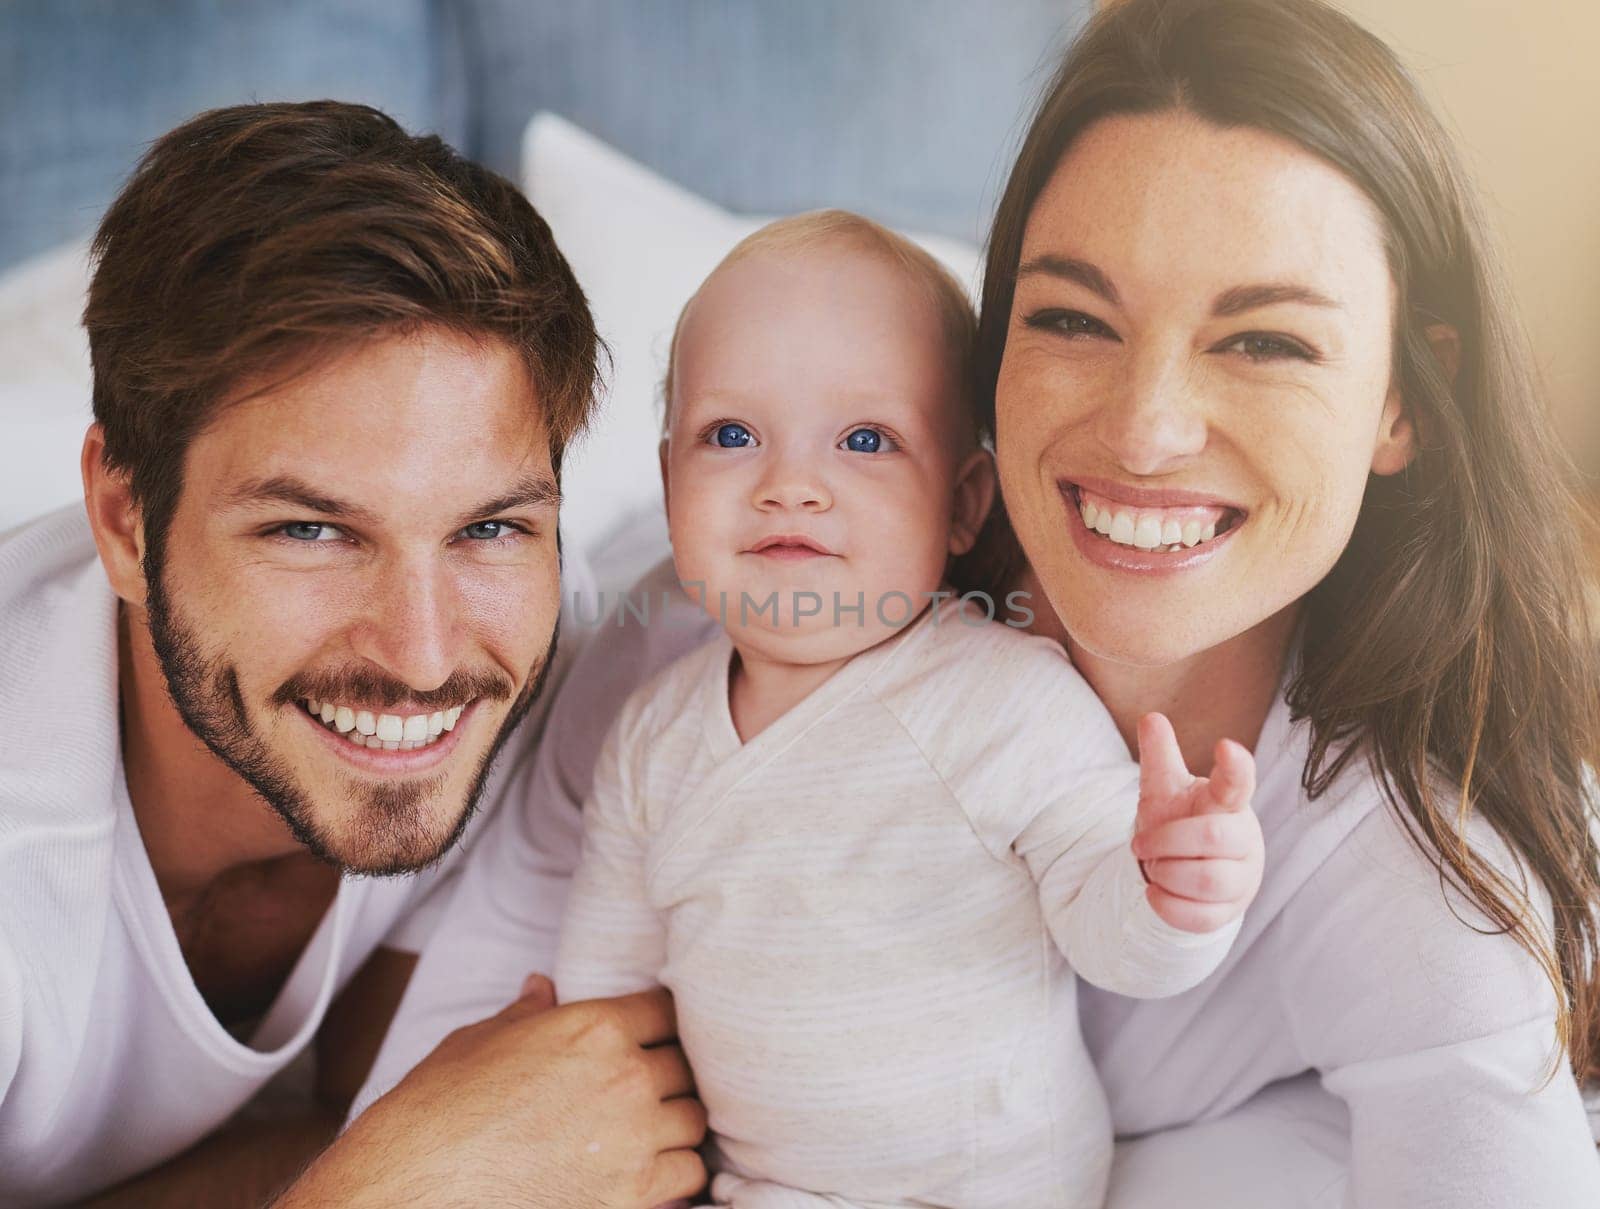 Portrait of happy family, baby and parents with love, care and quality time together at home. Mom, dad and cute newborn kid relaxing with smile, happiness and support of healthy childhood development.